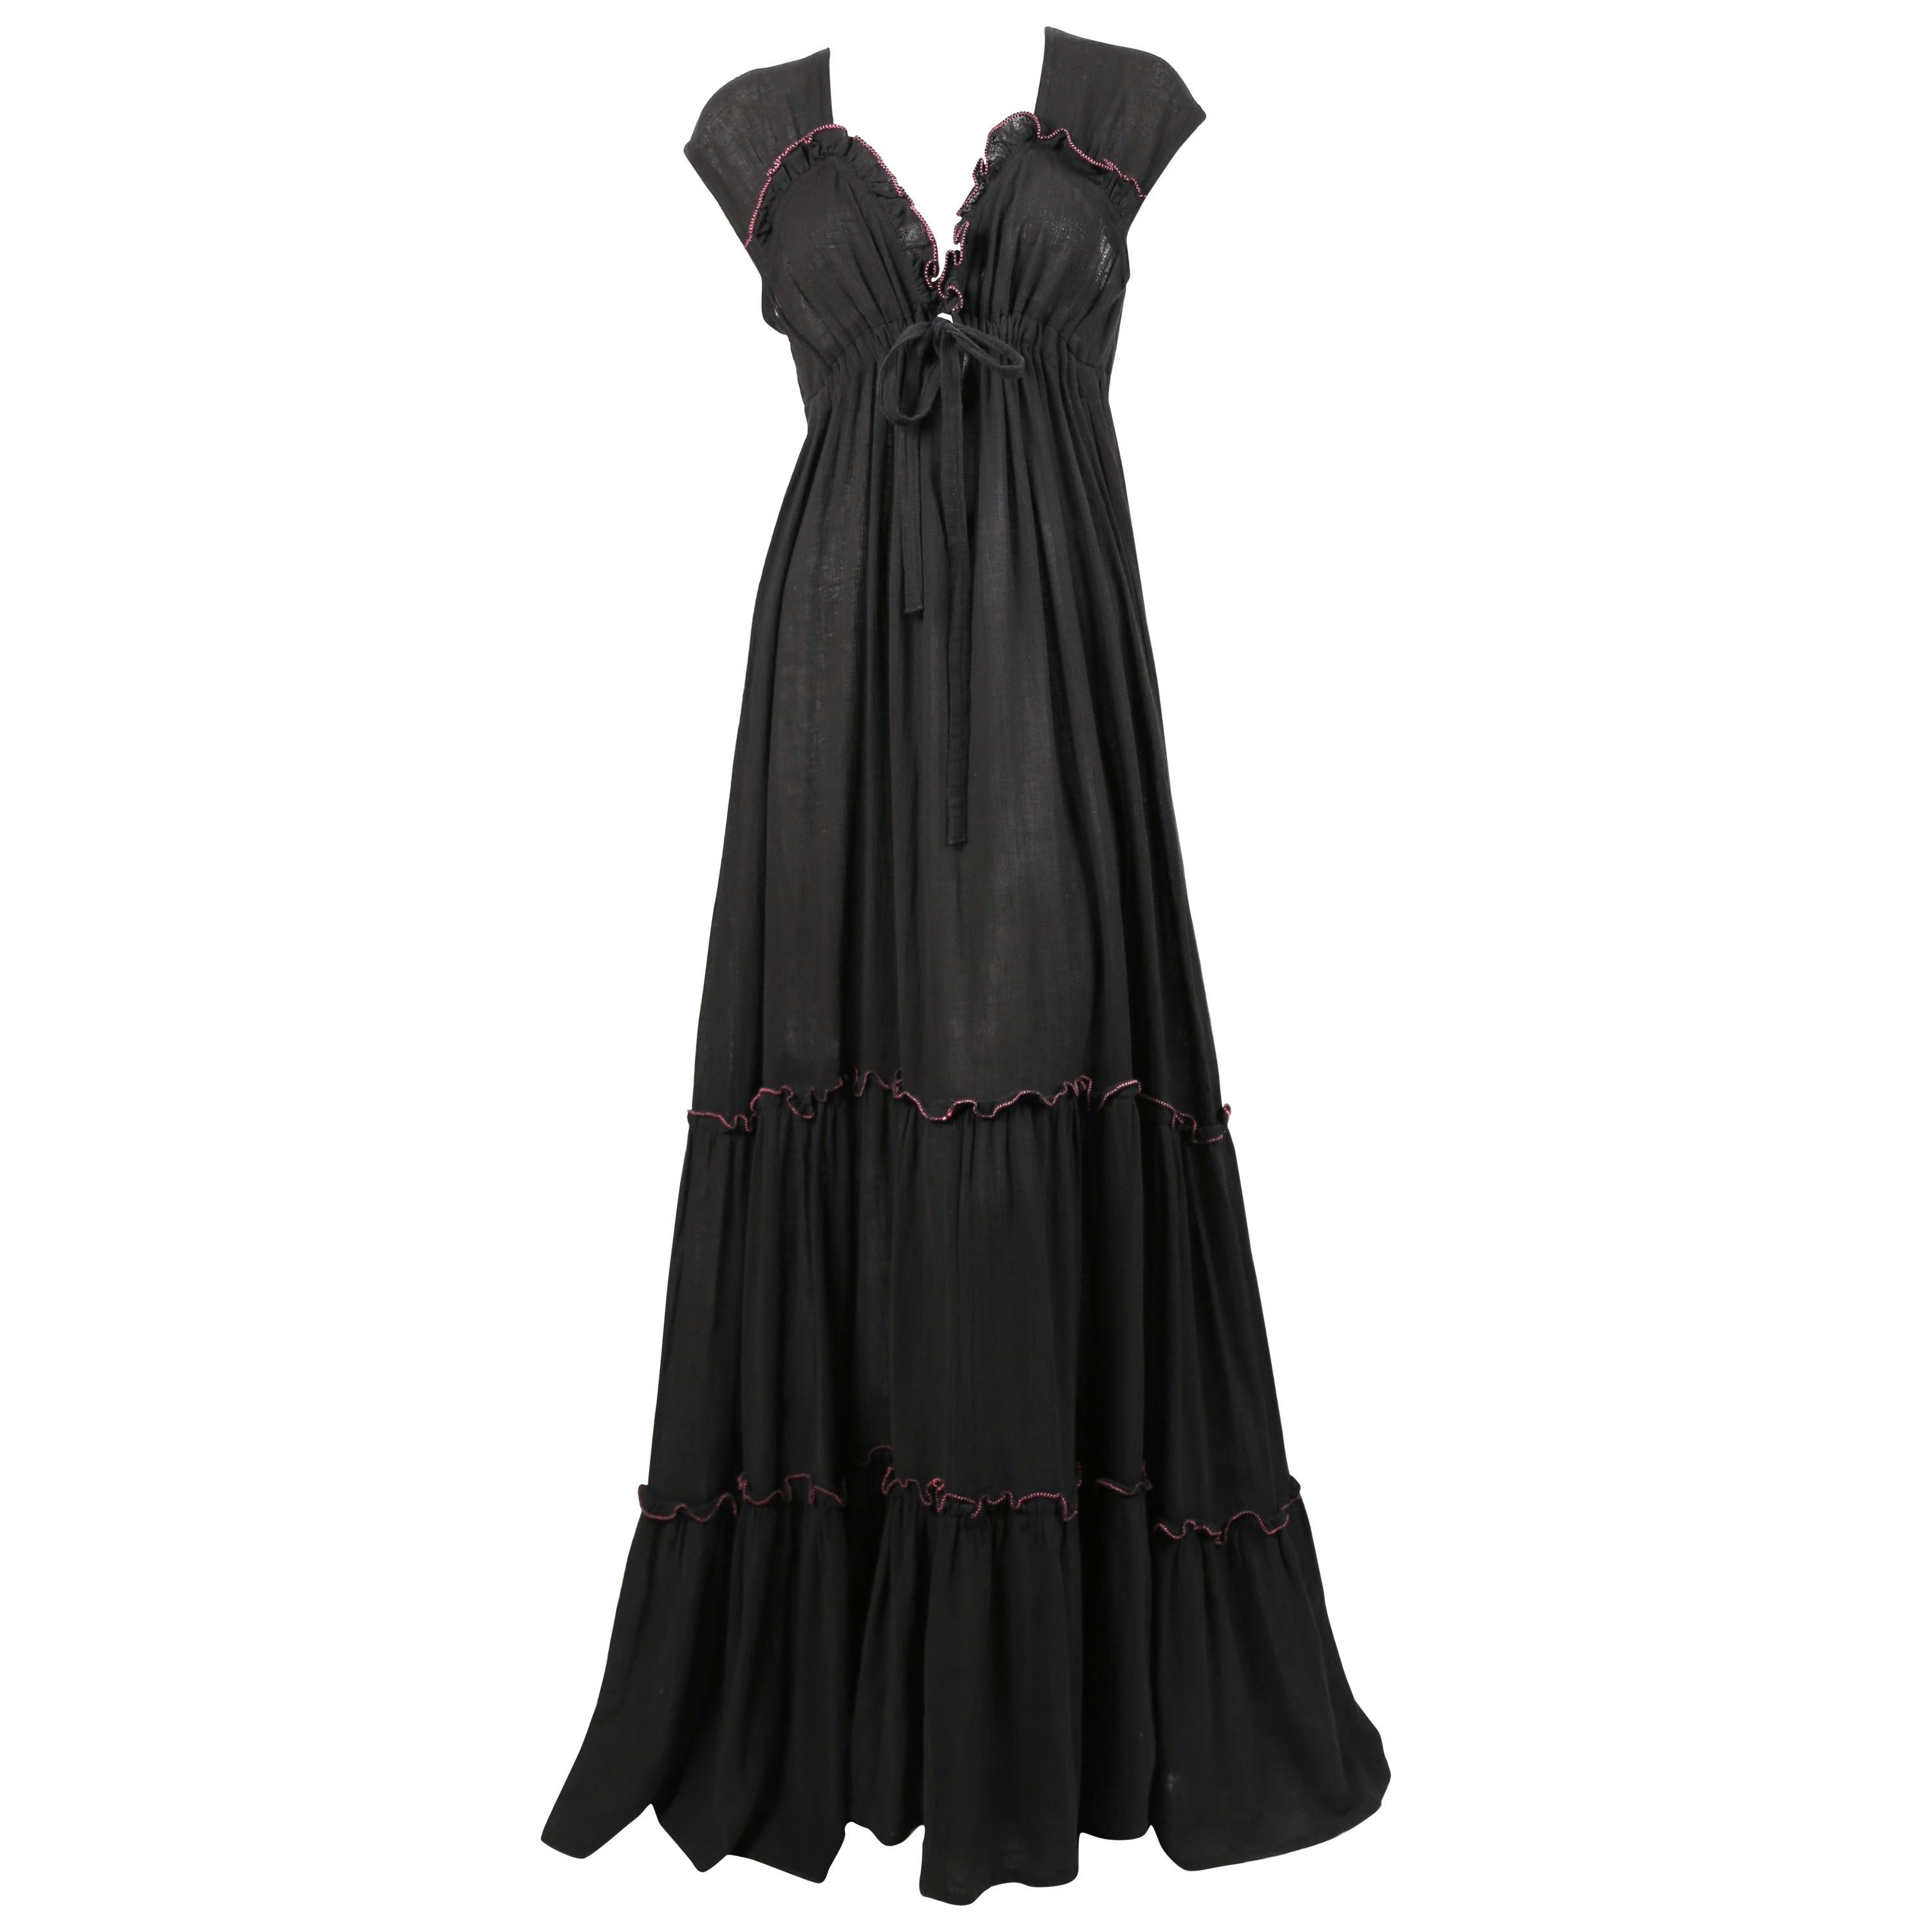 Radley black gauze maxi dress with pink stitching, 1970s For Sale at ...